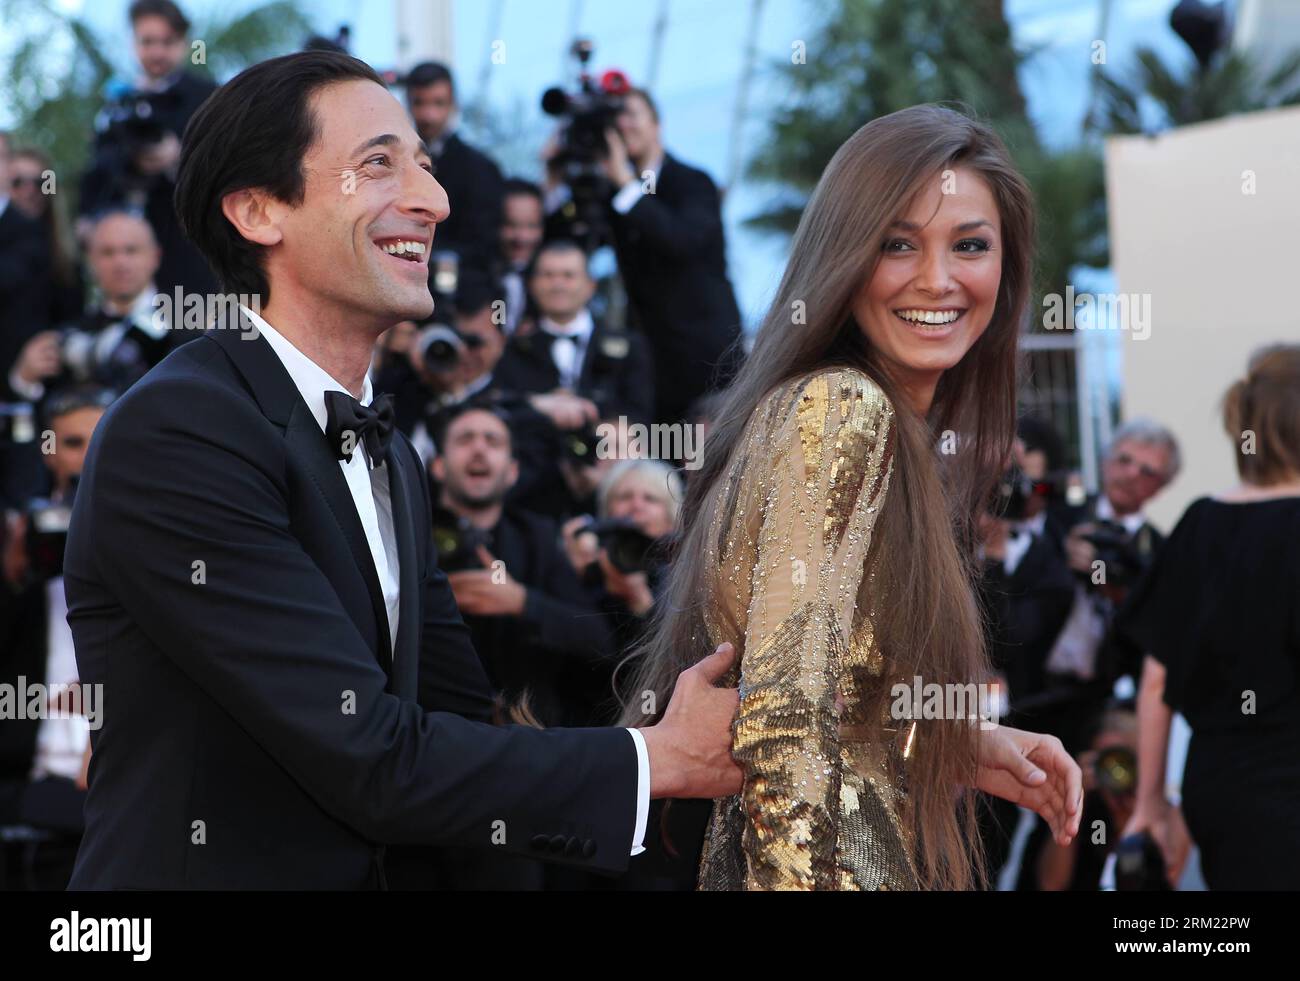 Bildnummer: 59675531  Datum: 21.05.2013  Copyright: imago/Xinhua CANNES, May 21, 2012 -- US actor Adrien Brody poses with his partner Lara Lieto as they arrive for the screening of the American film Behind the Candelabra presented in Competition at the 66th edition of the Cannes Film Festival in Cannes, southern France, May 21, 2013. (Xinhua/Gao Jing) (dzl) FRANCE-CANNES-FILM FESTIVAL-BEHIND THE CANDELABRA -PREMIERE PUBLICATIONxNOTxINxCHN Entertainment Film 66 Internationale Filmfestspiele Cannes People premiumd x0x xkg 2013 quer Aufmacher     59675531 Date 21 05 2013 Copyright Imago XINHUA Ca Stock Photo